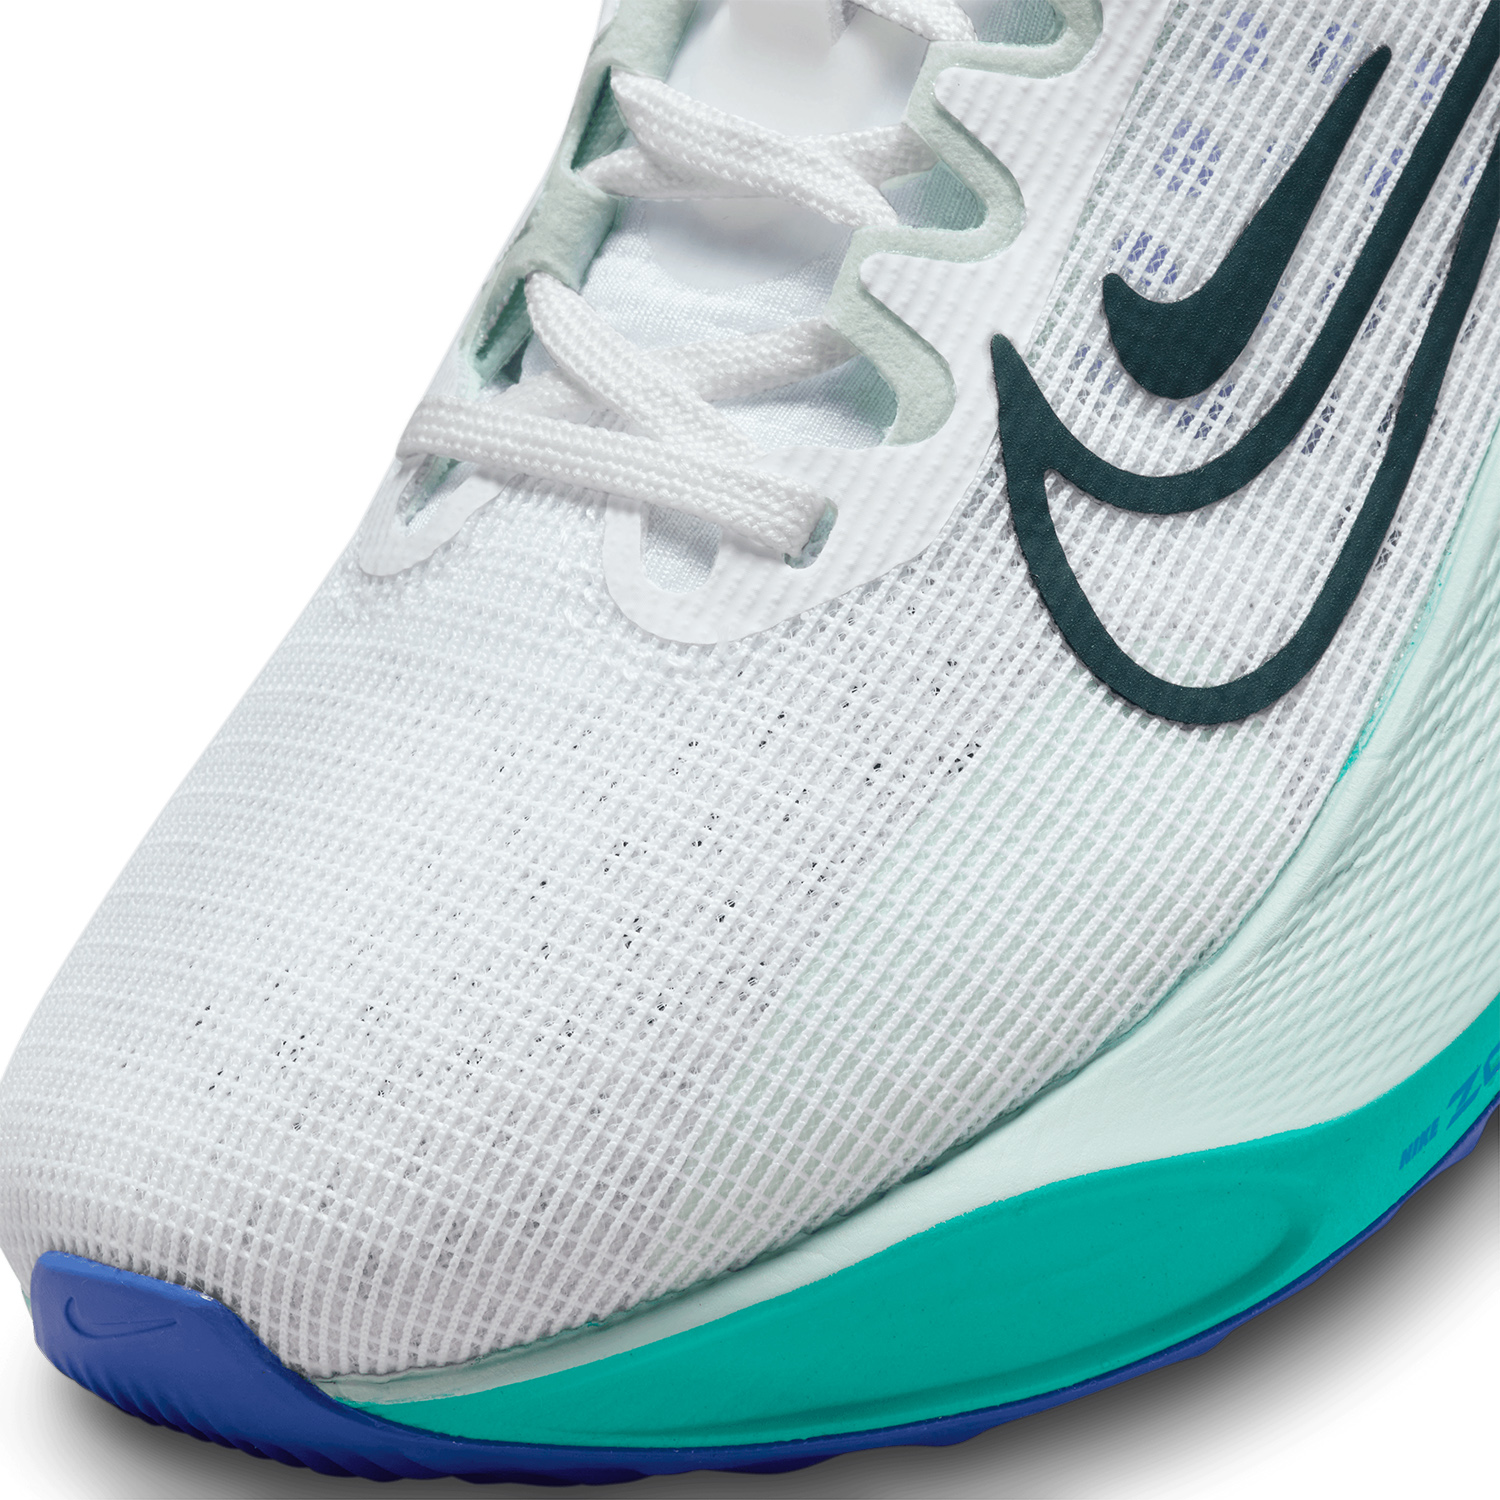 Nike Zoom Fly 5 Women's Running Shoes - White/Deep Jungle